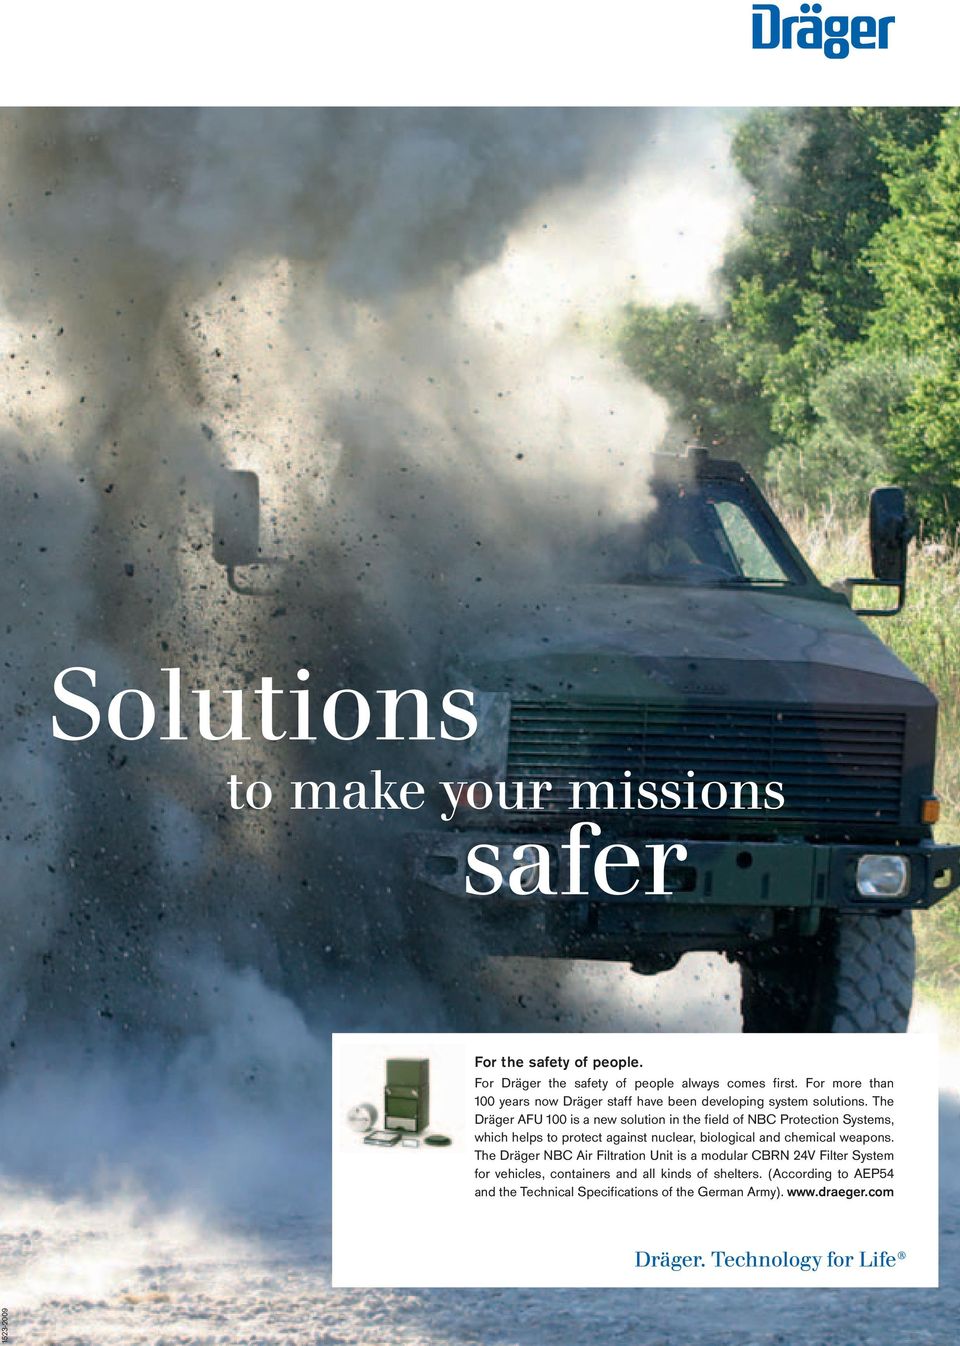 The Dräger AFU 100 is a new solution in the field of NBC Protection Systems, which helps to protect against nuclear, biological and chemical weapons.